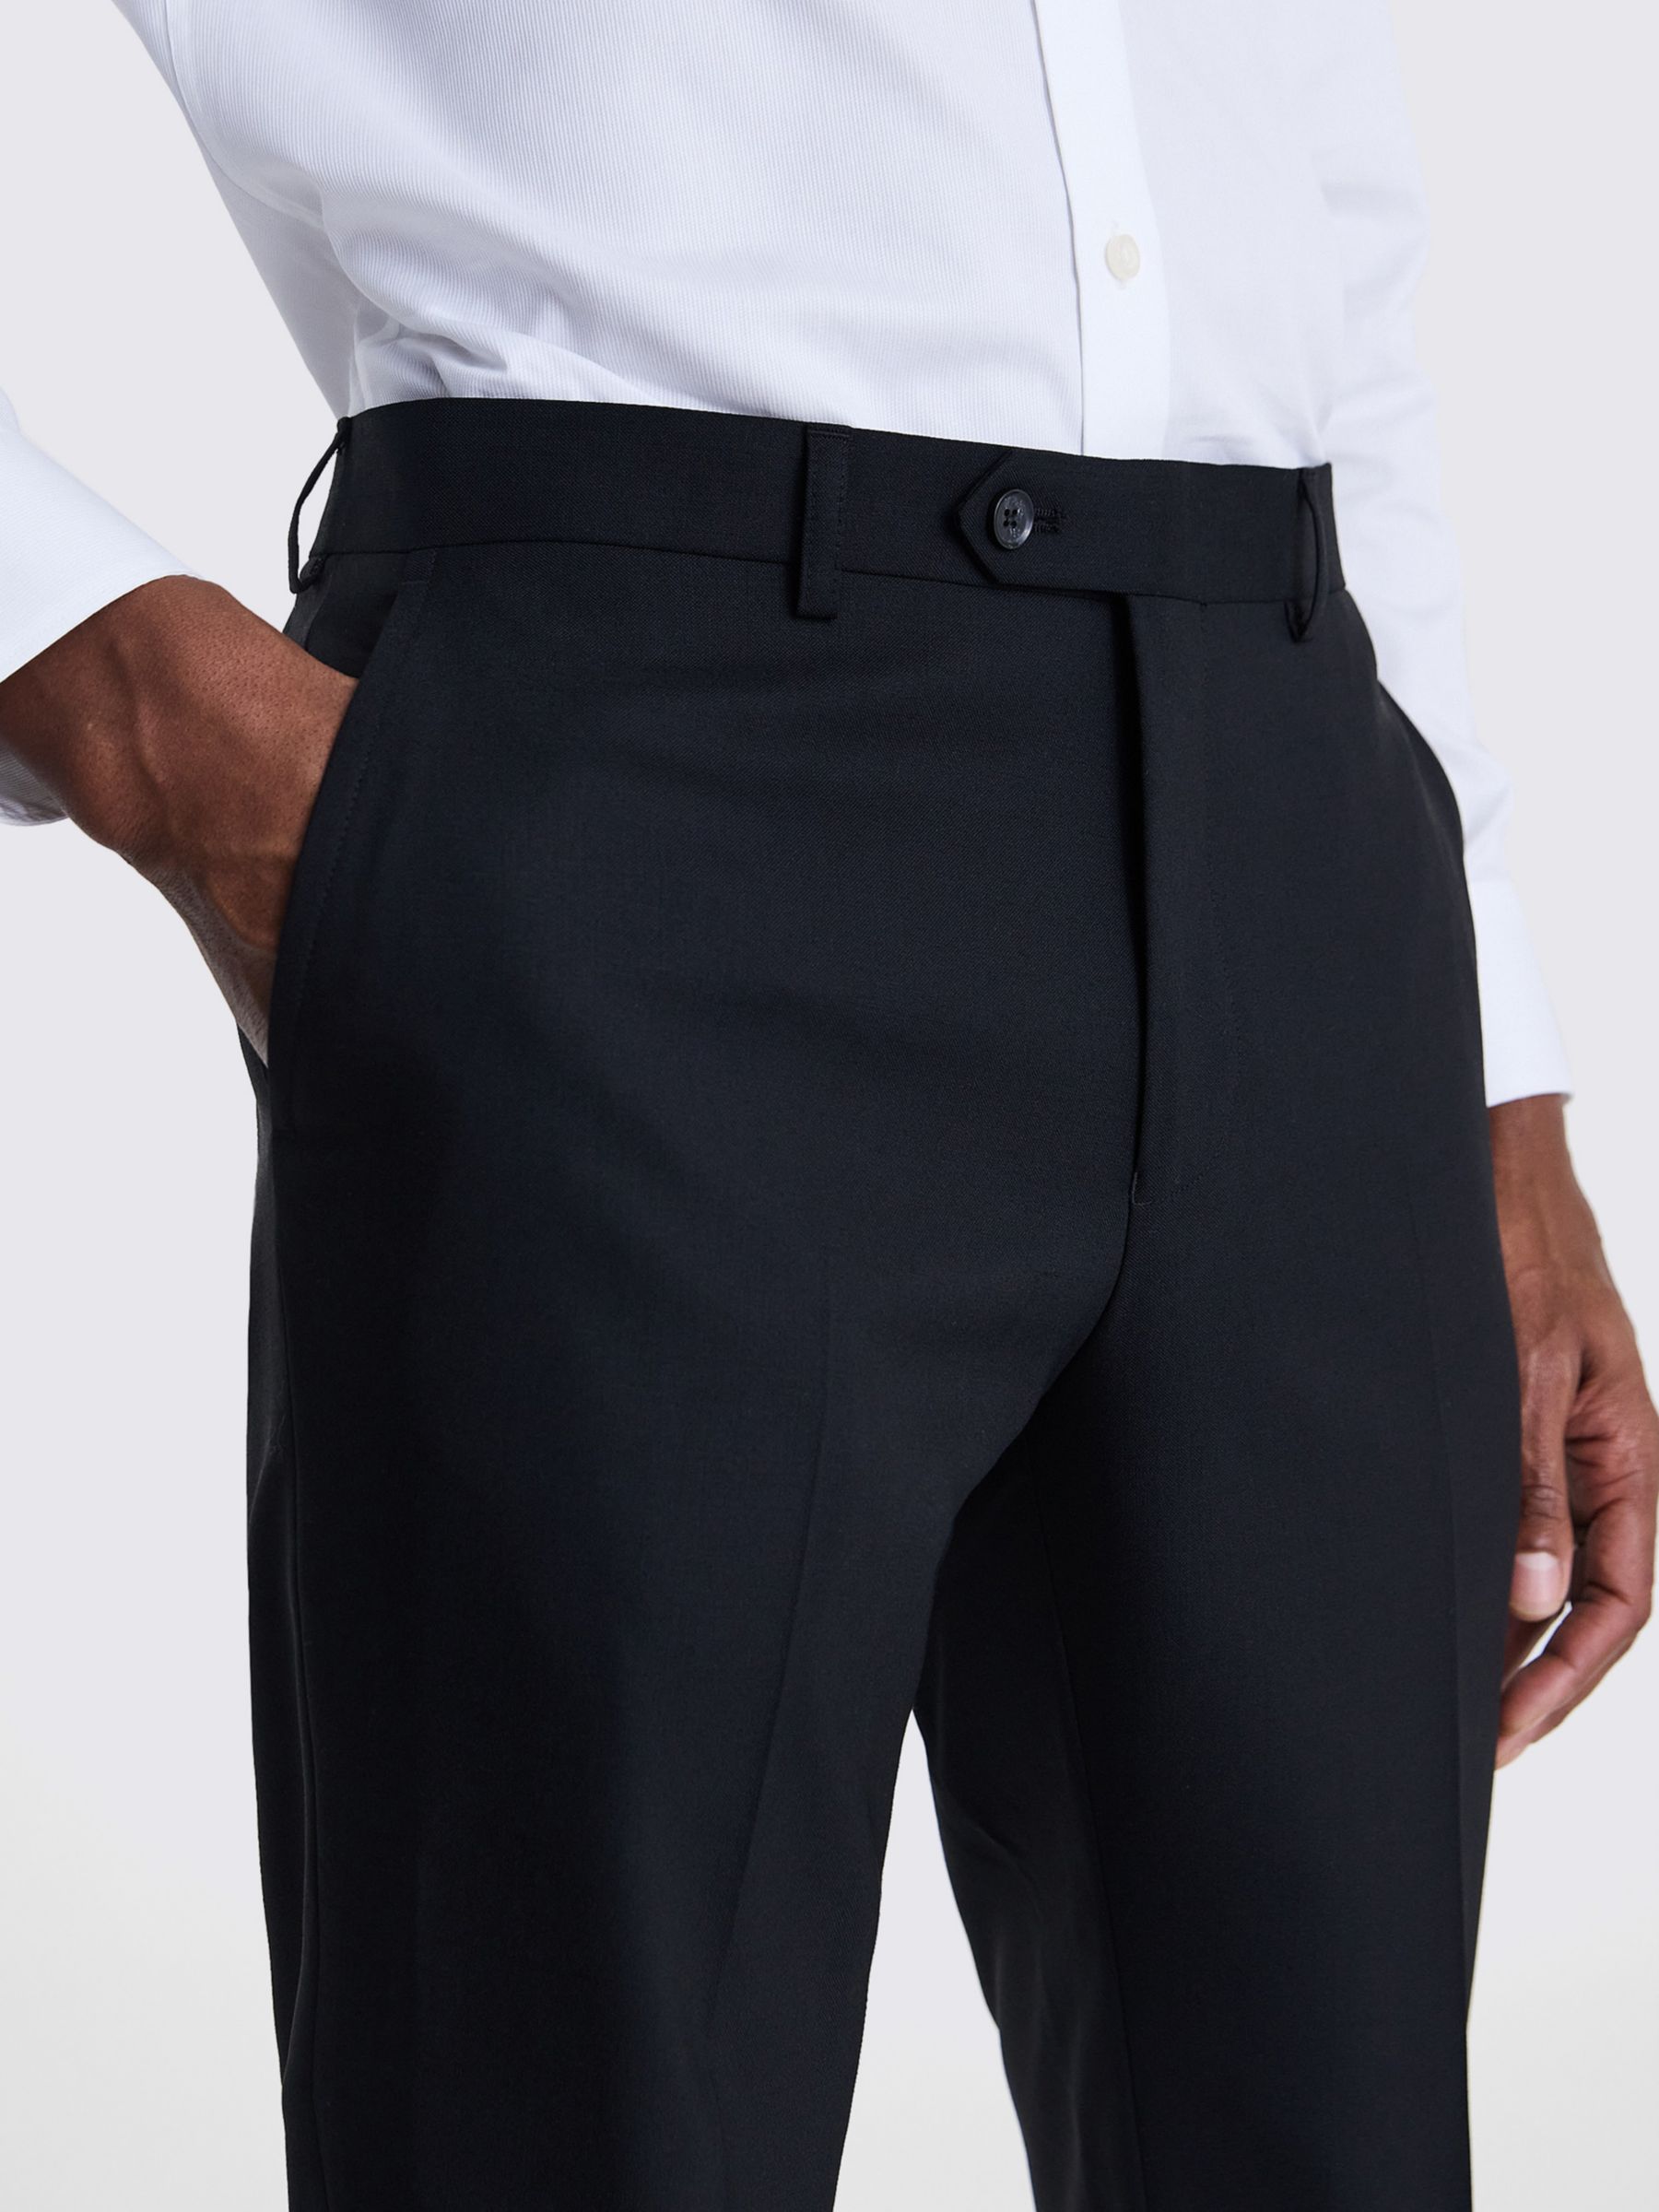 Buy Moss x Barberis Italian Tailored Fit Half Lined Trousers, Black Online at johnlewis.com